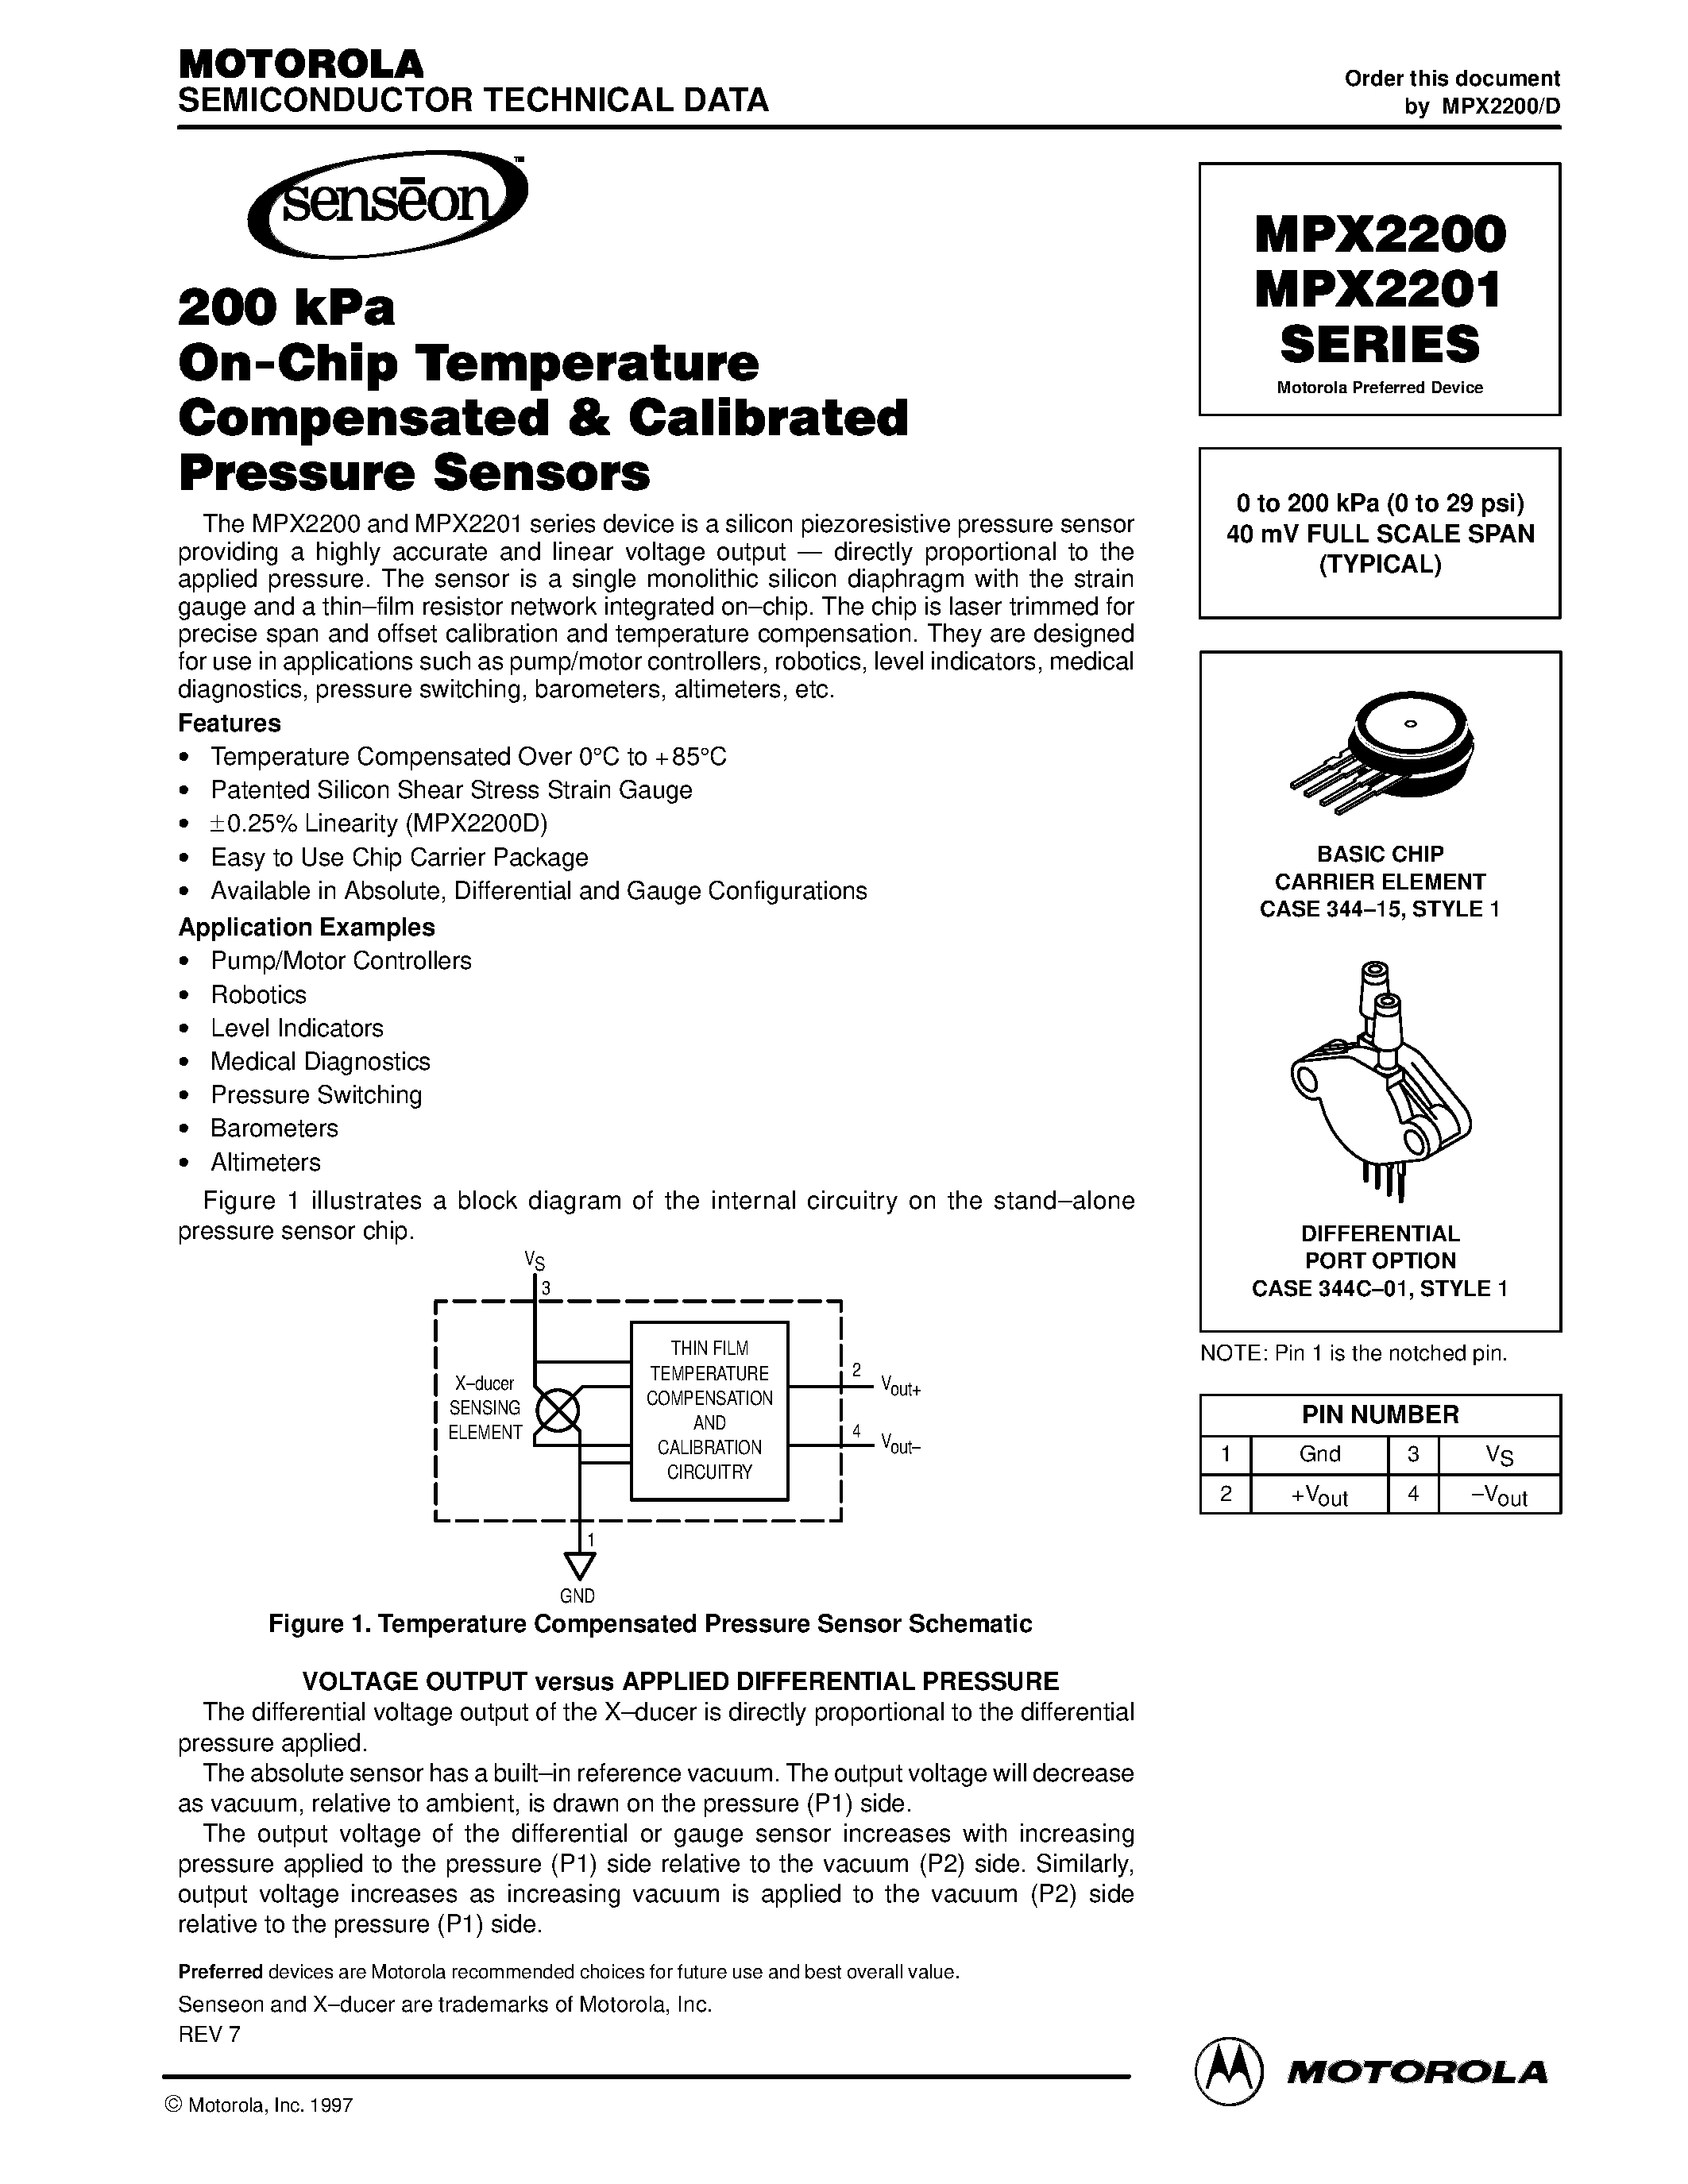 Datasheet MPX2200 - (MPX2200 / MPX2201) 0 to 200 kPa (0 to 29 psi) 40 mV FULL SCALE SPAN (TYPICAL) page 1